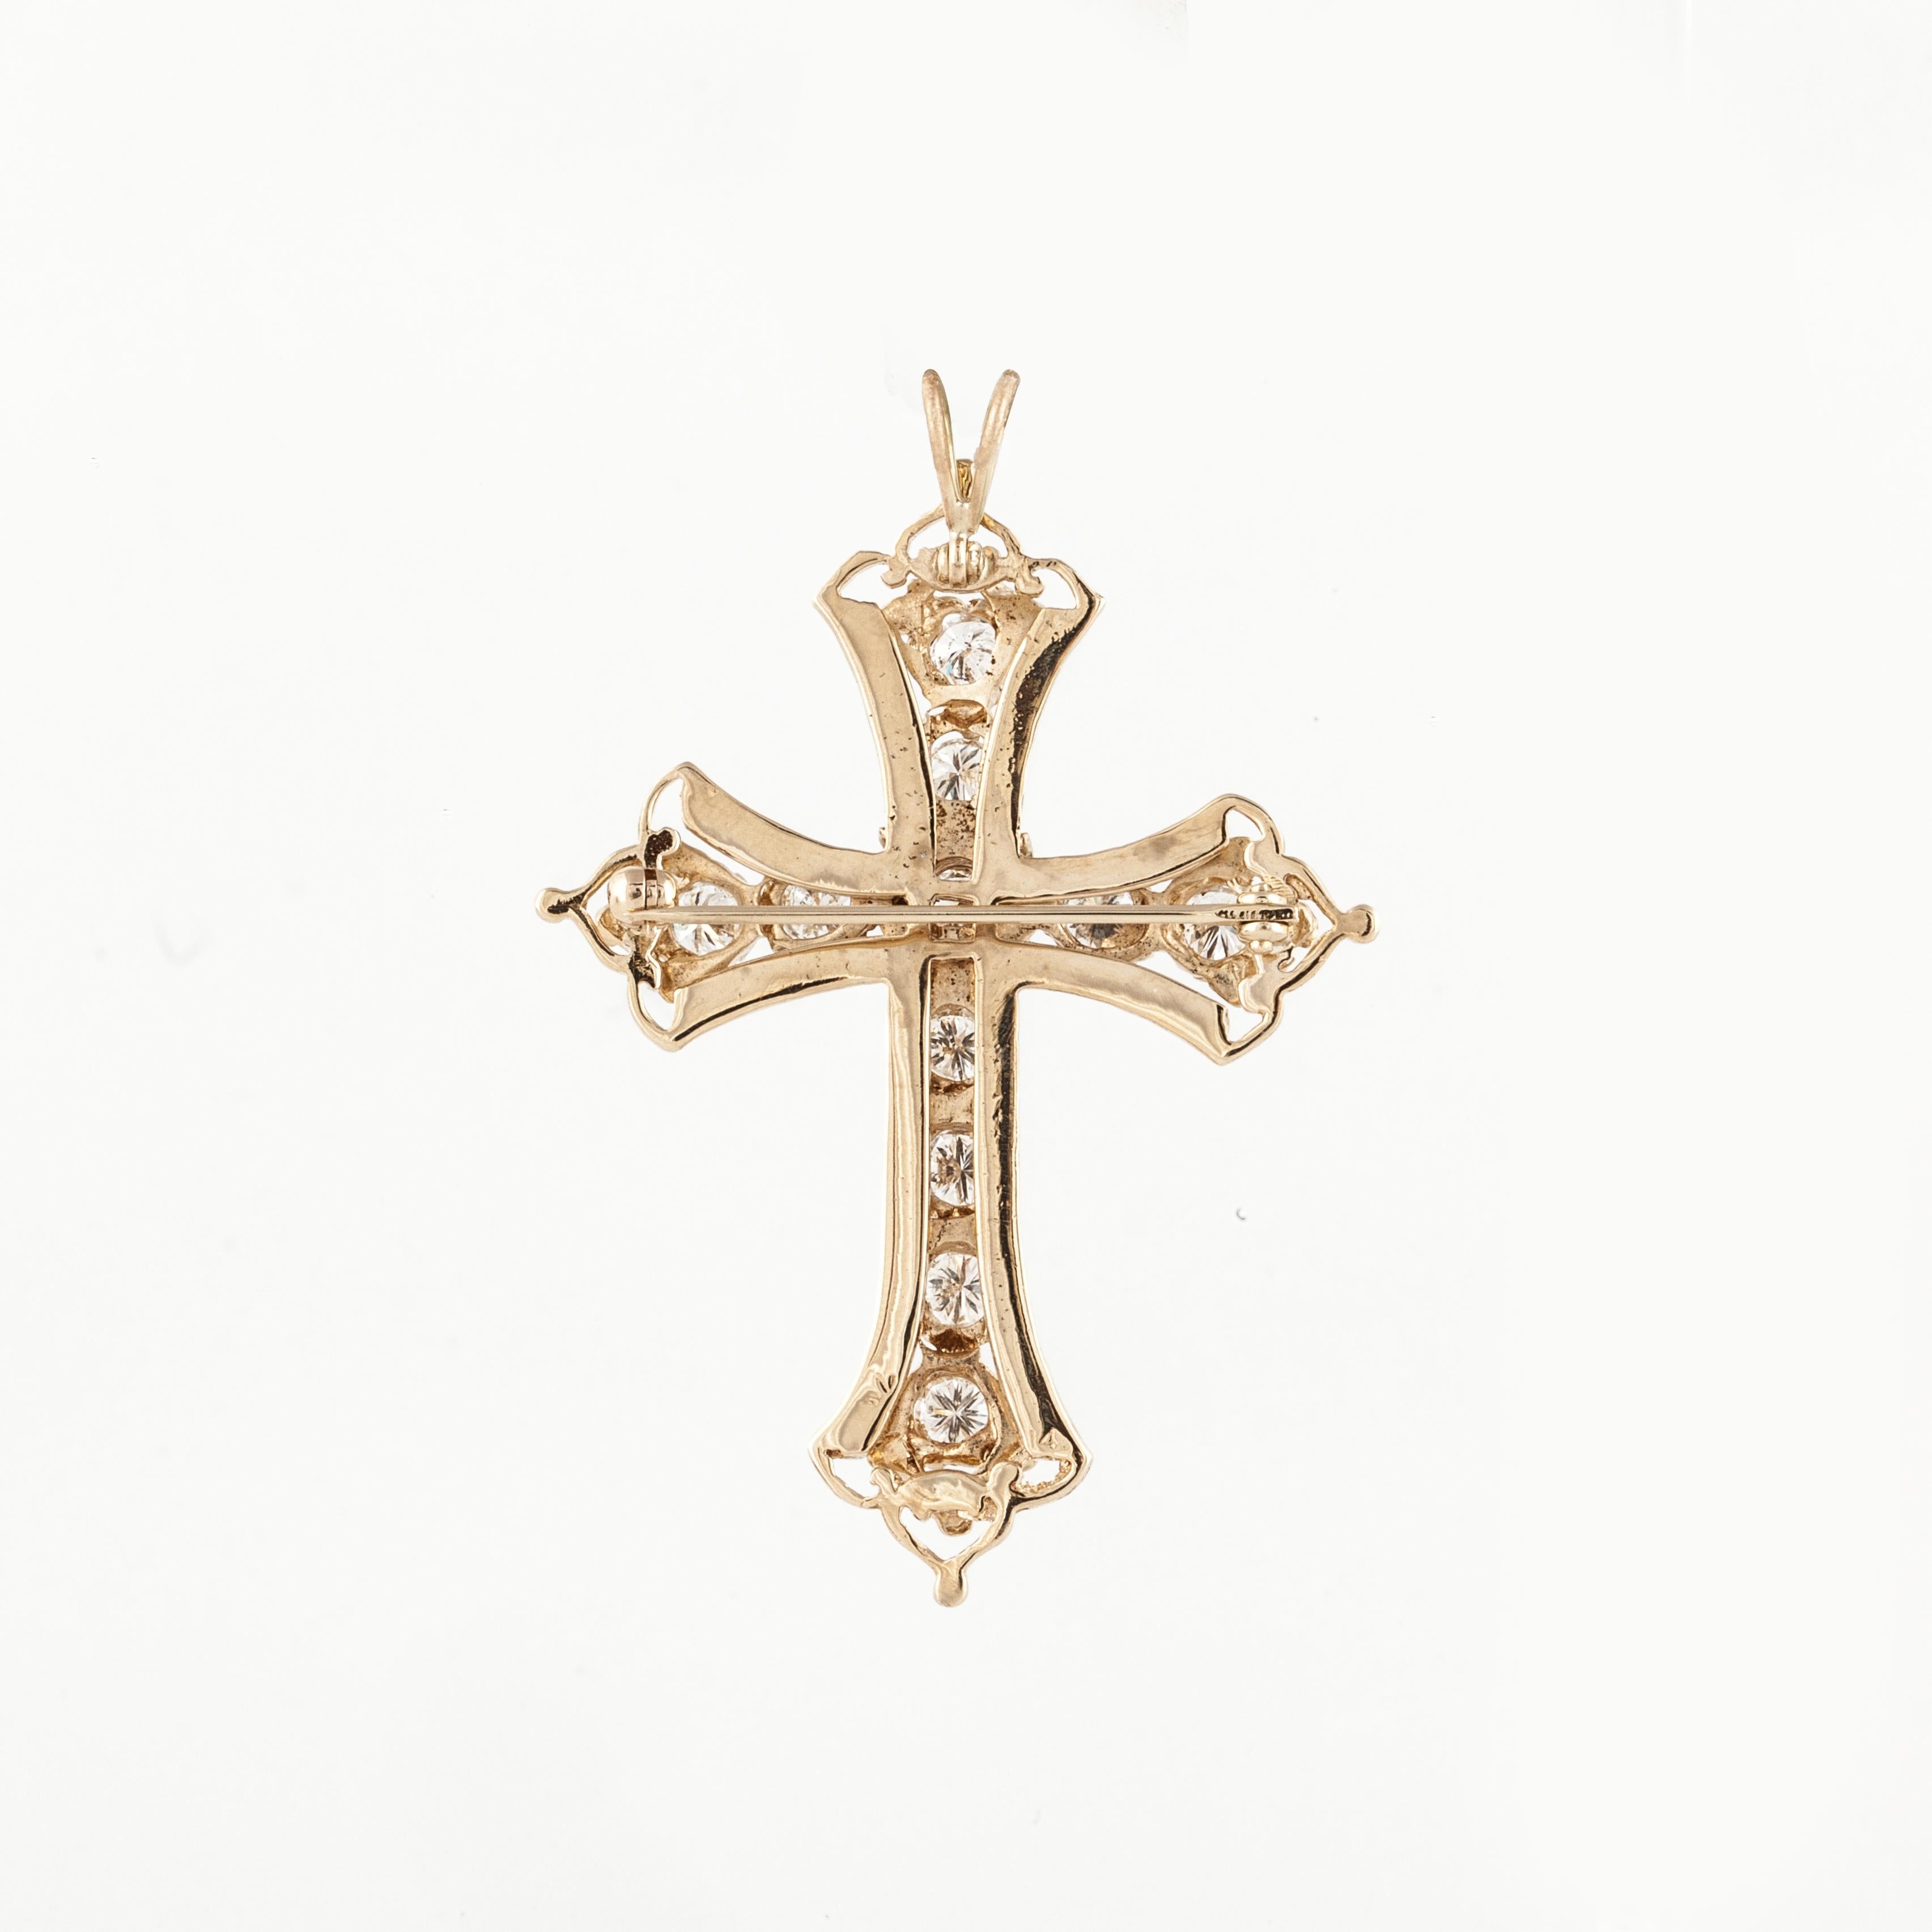 14K yellow gold diamond cross pin/pendant.  Total of eleven (11) round diamonds with a total carat weight of 2.50; they are G-H in color and SI-1 in clarity.  There is also black enameling along the edges.  Measures 2-3/8